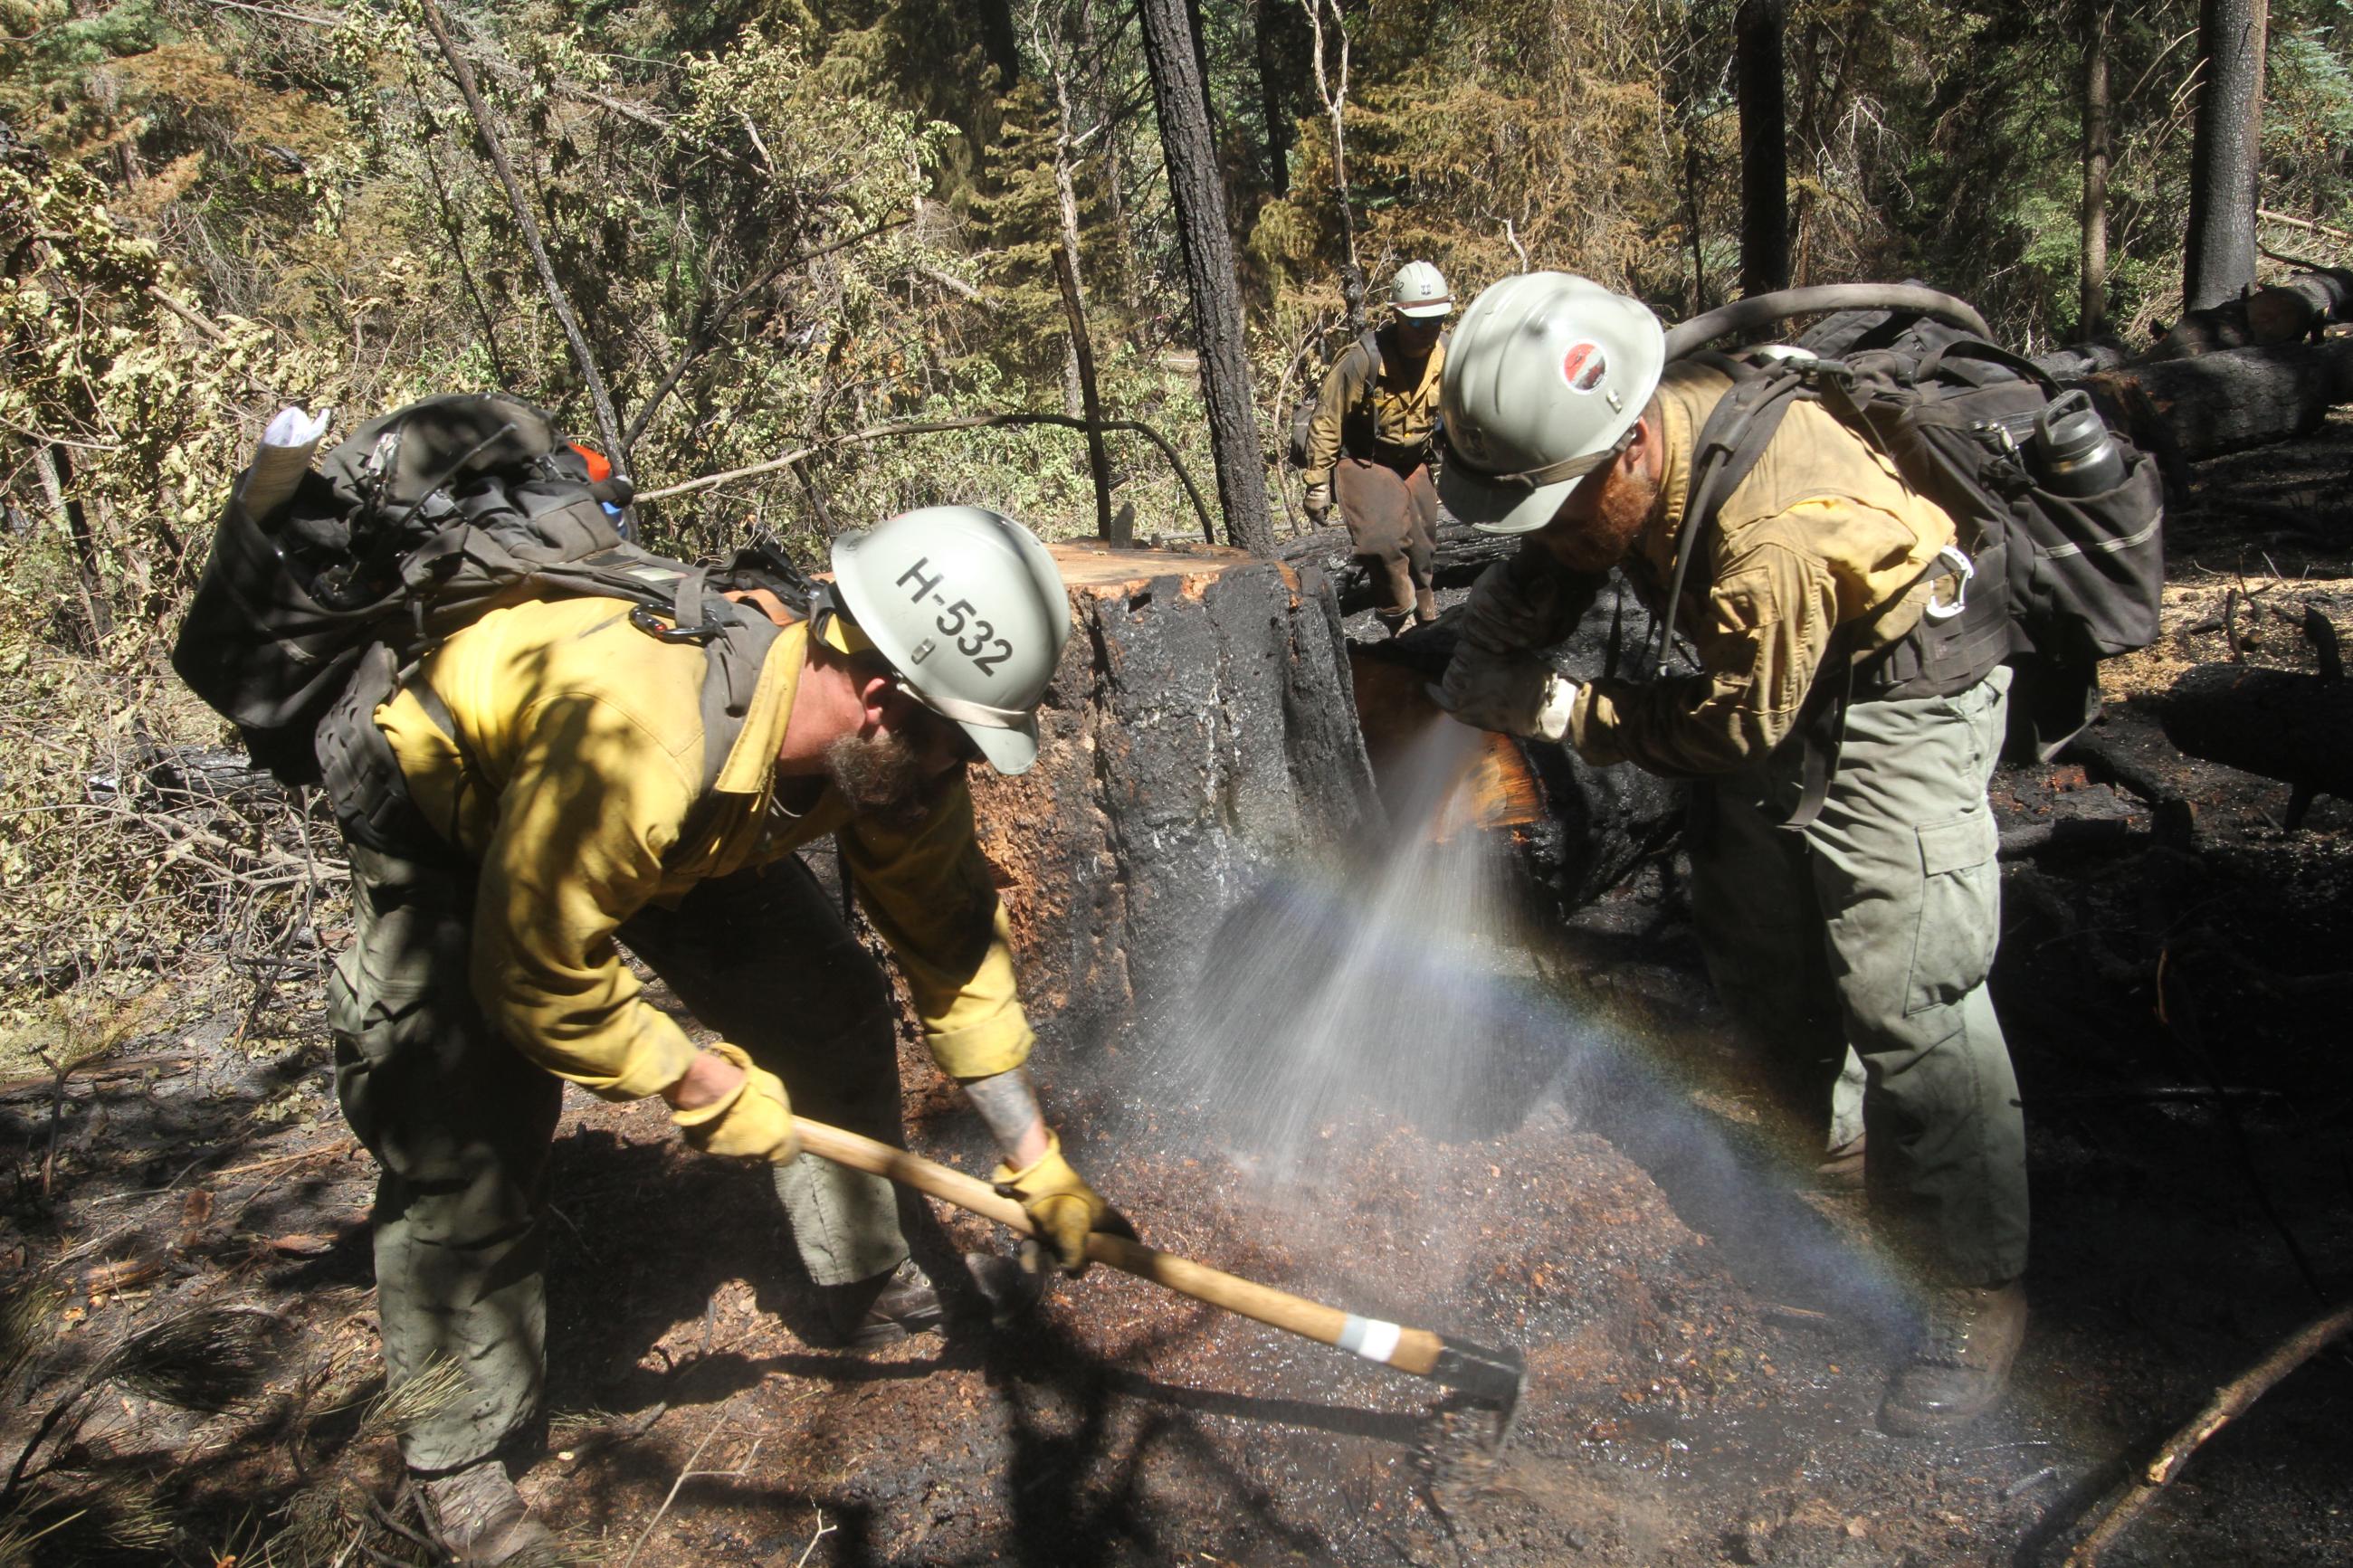 Two firefighters with yellow shirts digging and spraying water at hot stump hole. Steam rising from ground.